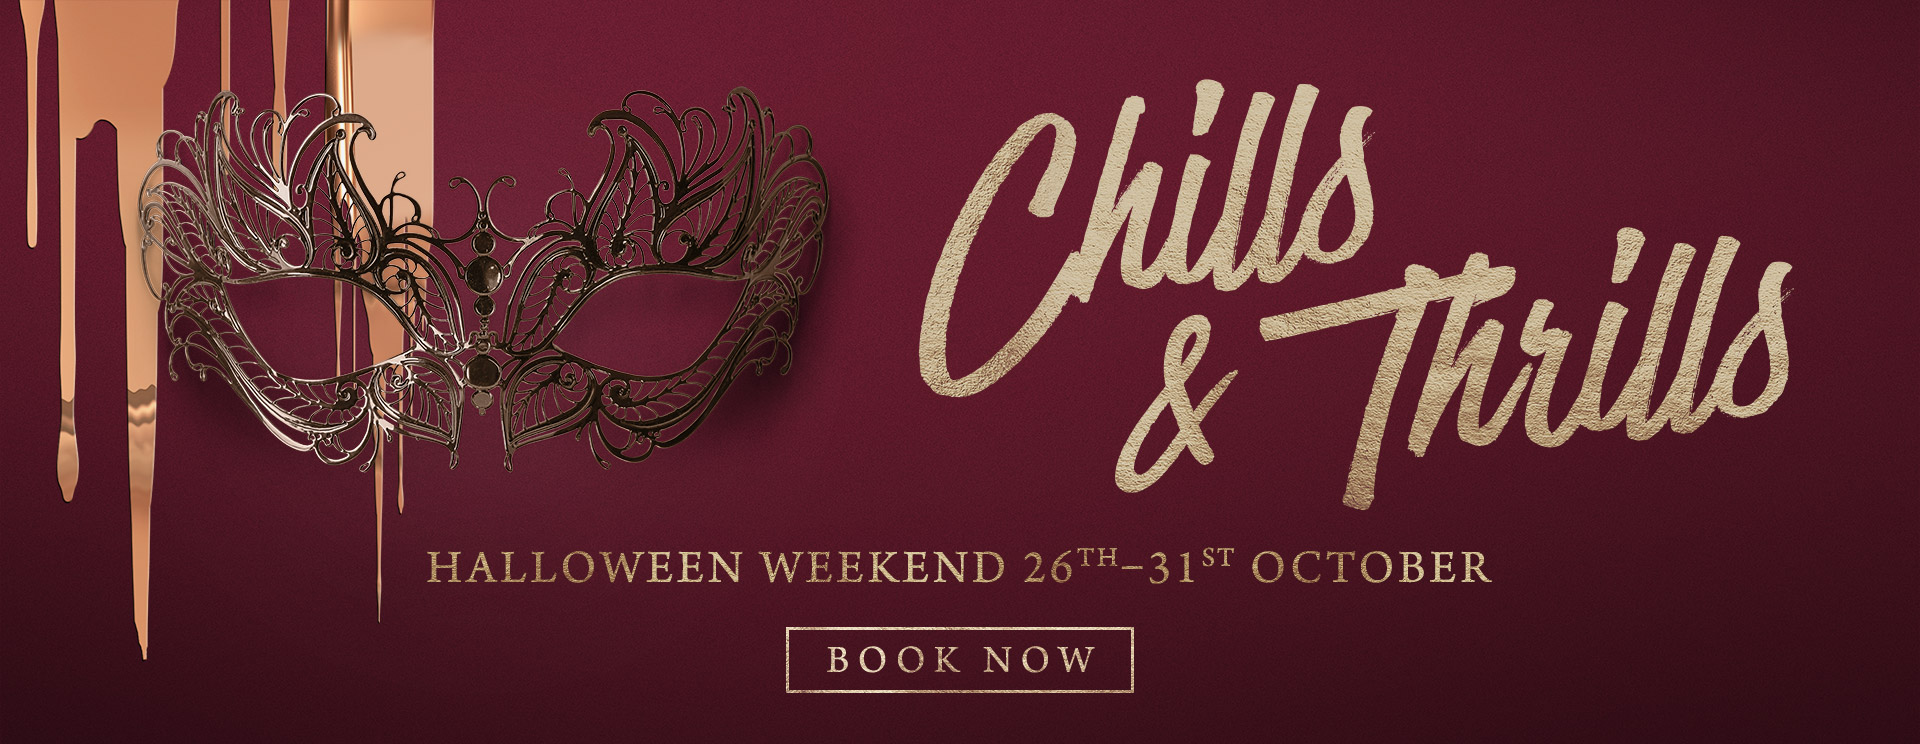 Chills & Thrills this Halloween at The Seahorse